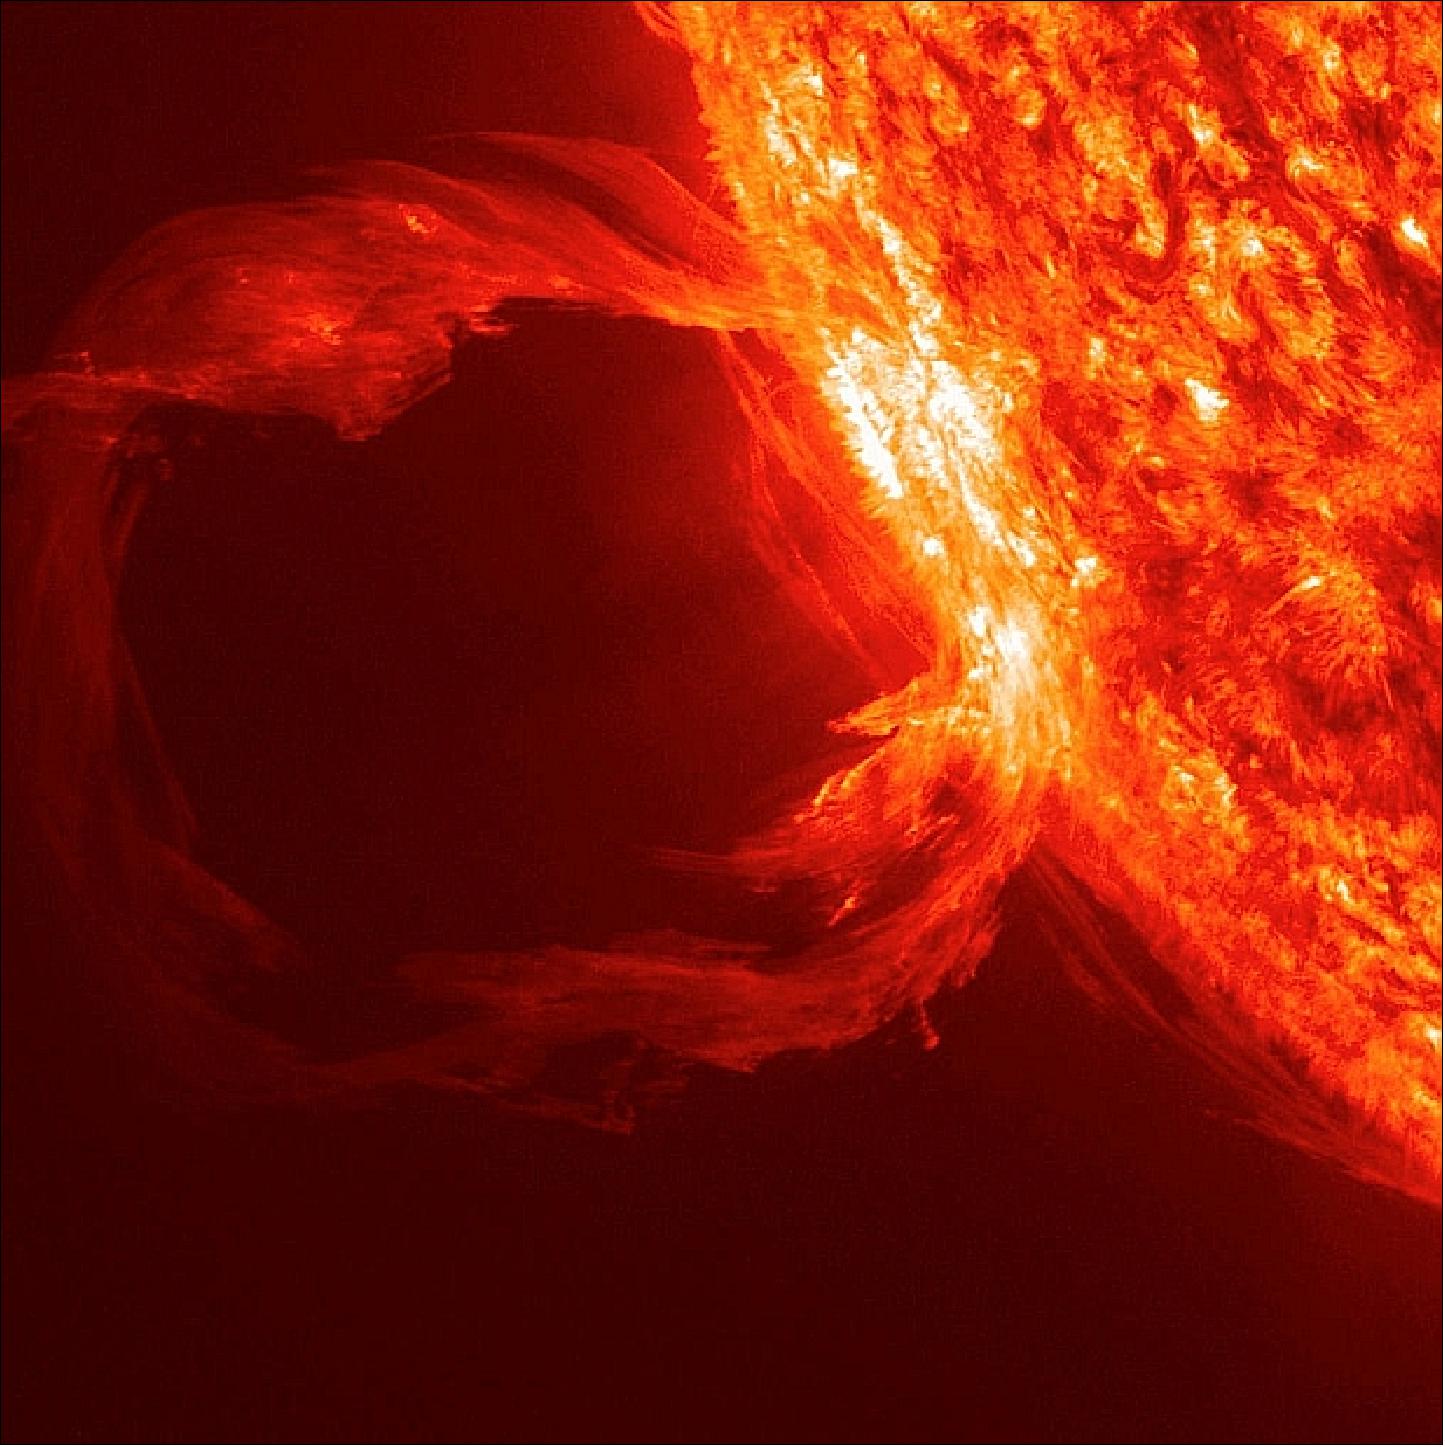 Figure 39: An erupting prominence observed by the AIA instrument on March 30, 2010 (image credit: NASA)